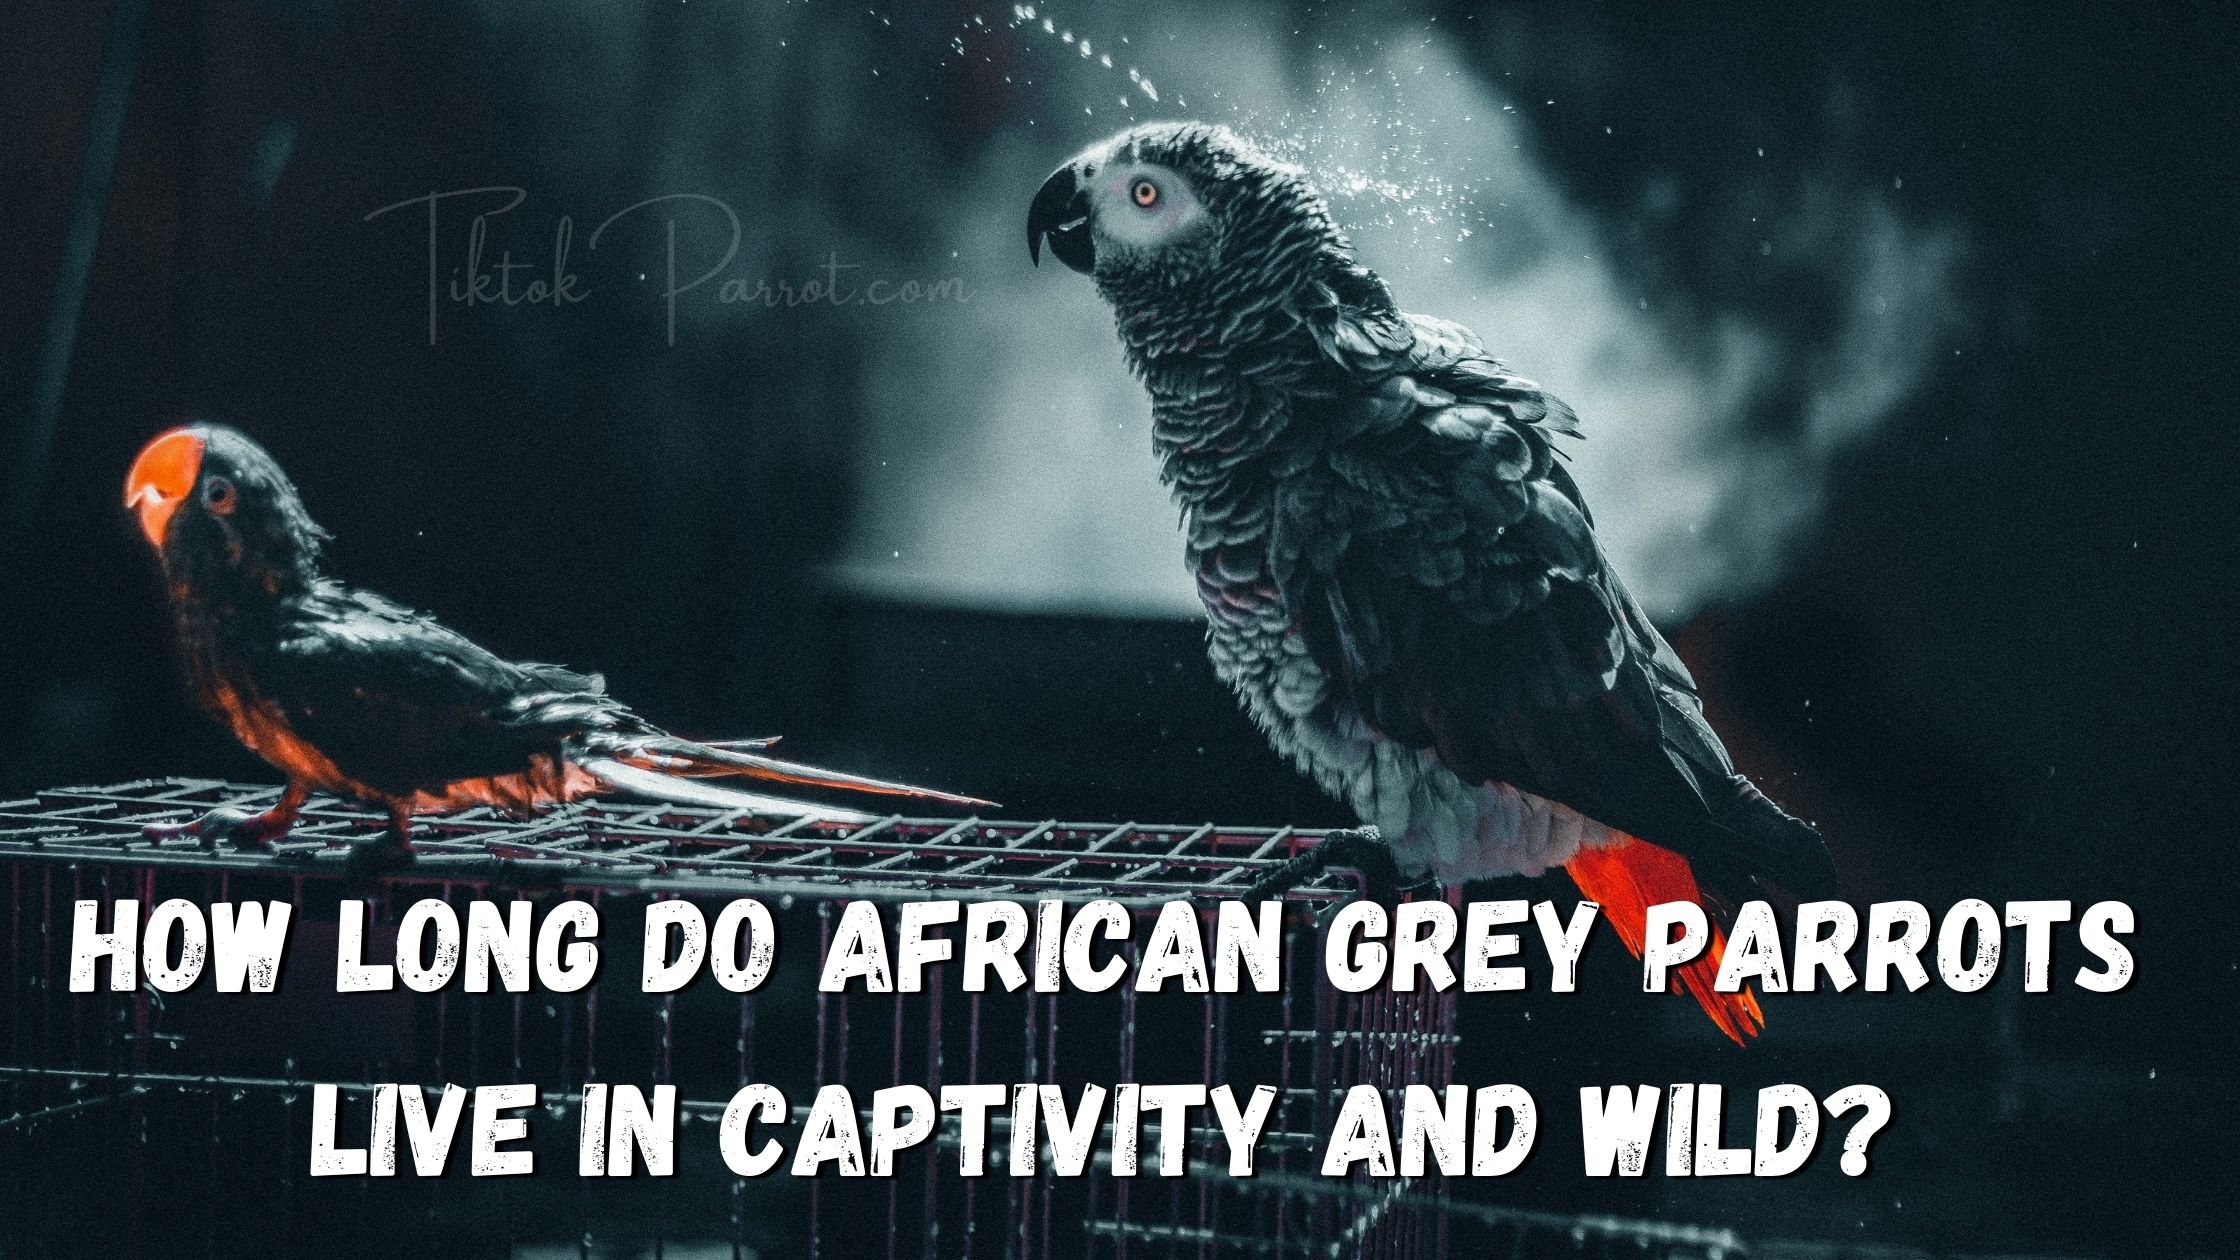 How Long Do African Grey Parrots Live in Captivity and Wild